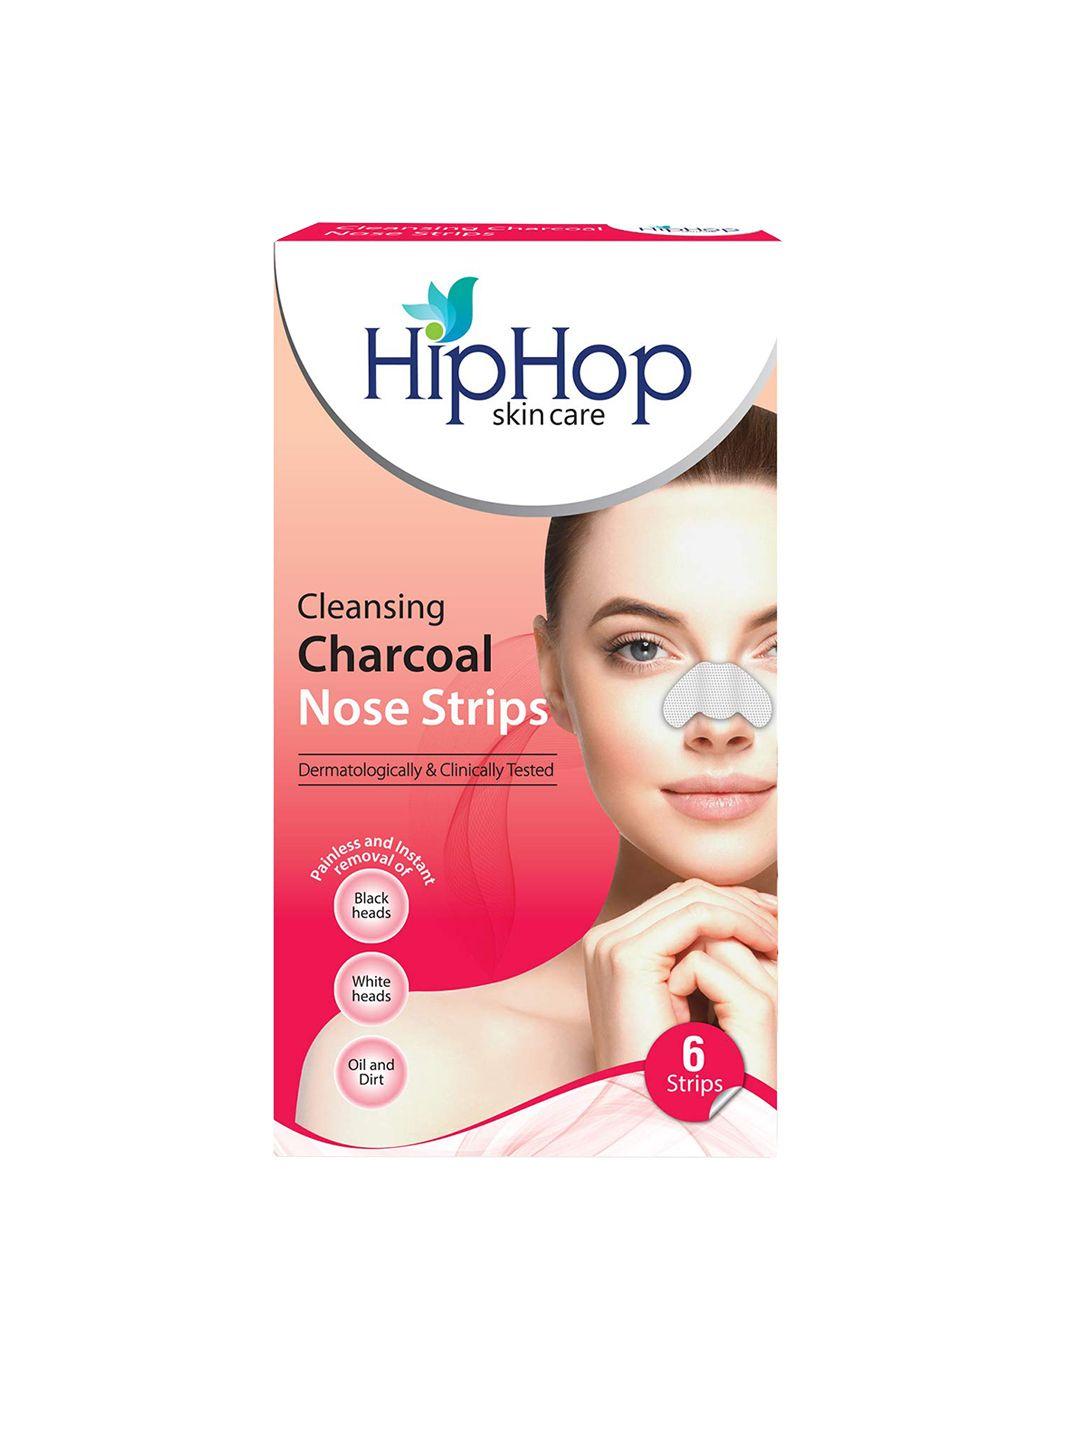 hiphop skincare cleansing charcoal nose strips - 6 strips